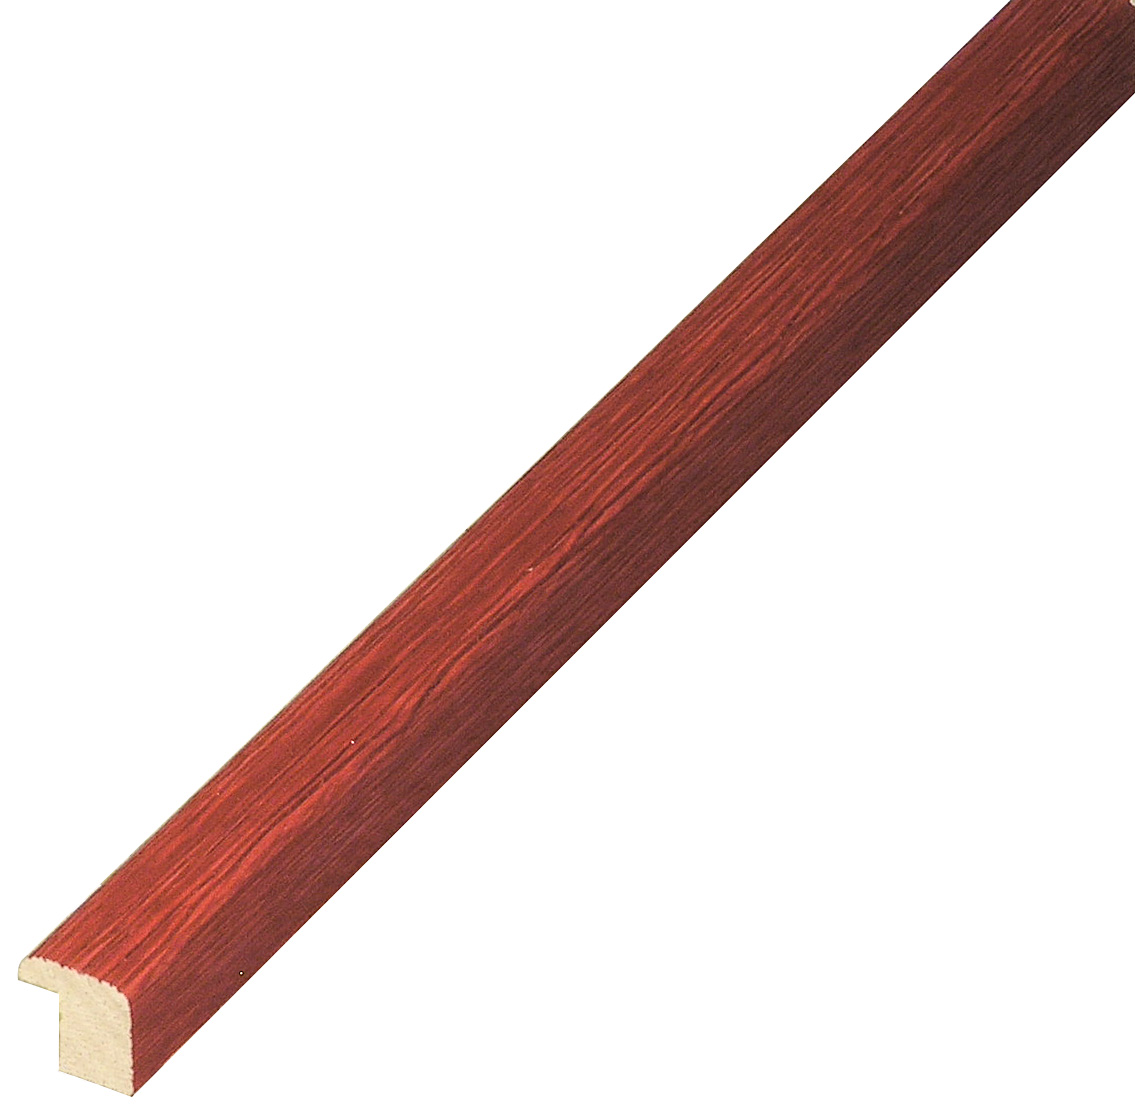 Moulding ayous woodworm treated mm 13x13 - scratched finish - Red - 311ROSSO